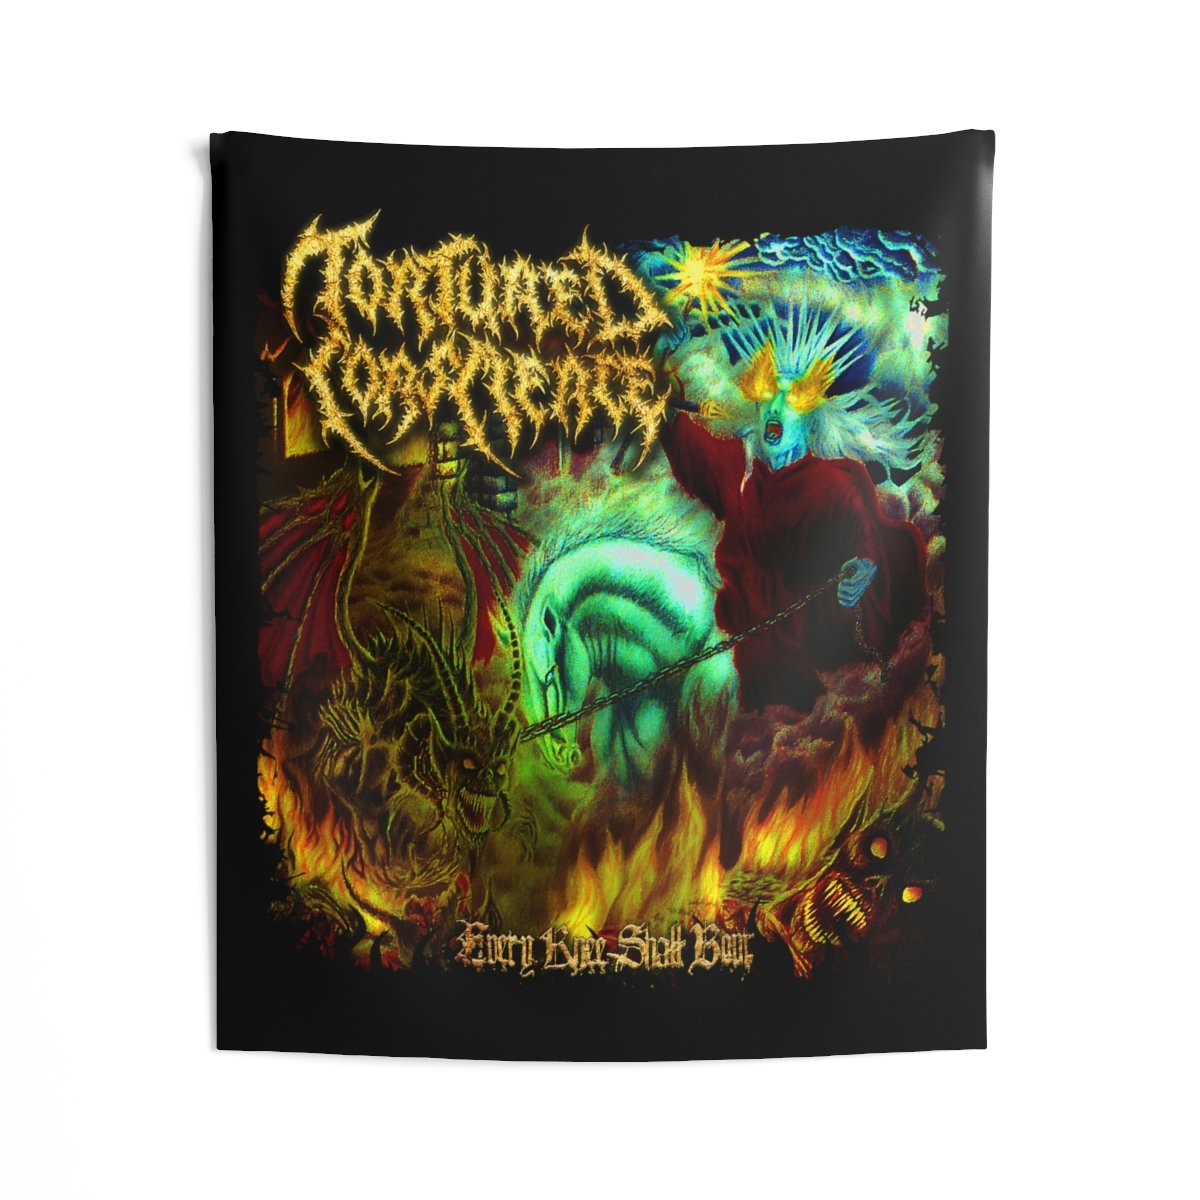 Tortured Conscience – Every Knee Shall Bow Indoor Wall Tapestries